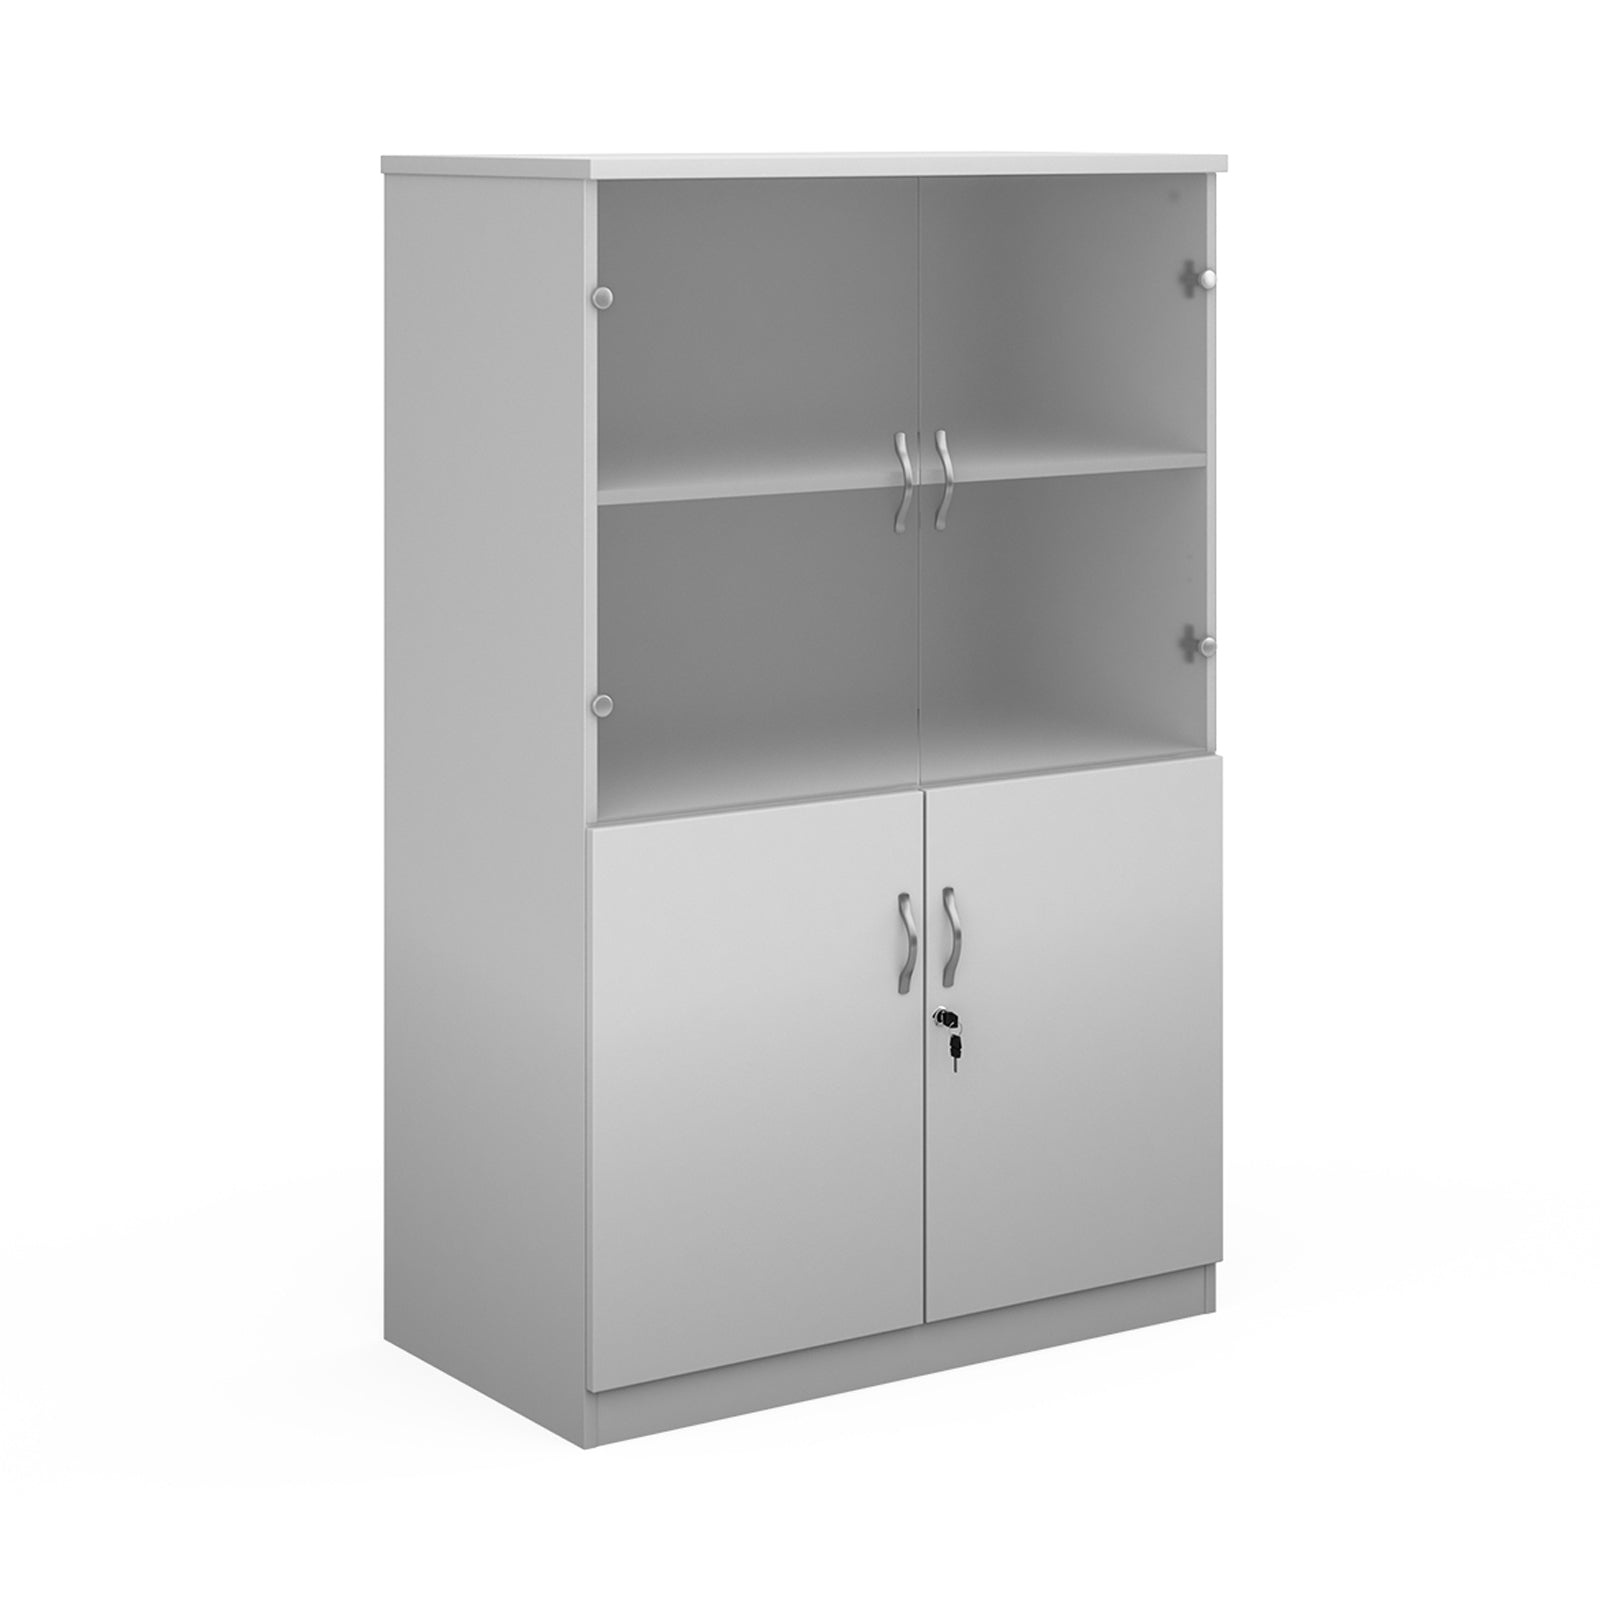 Deluxe Three or Four Shelf 1020mm Wide Combination Bookcase with Glass Doors